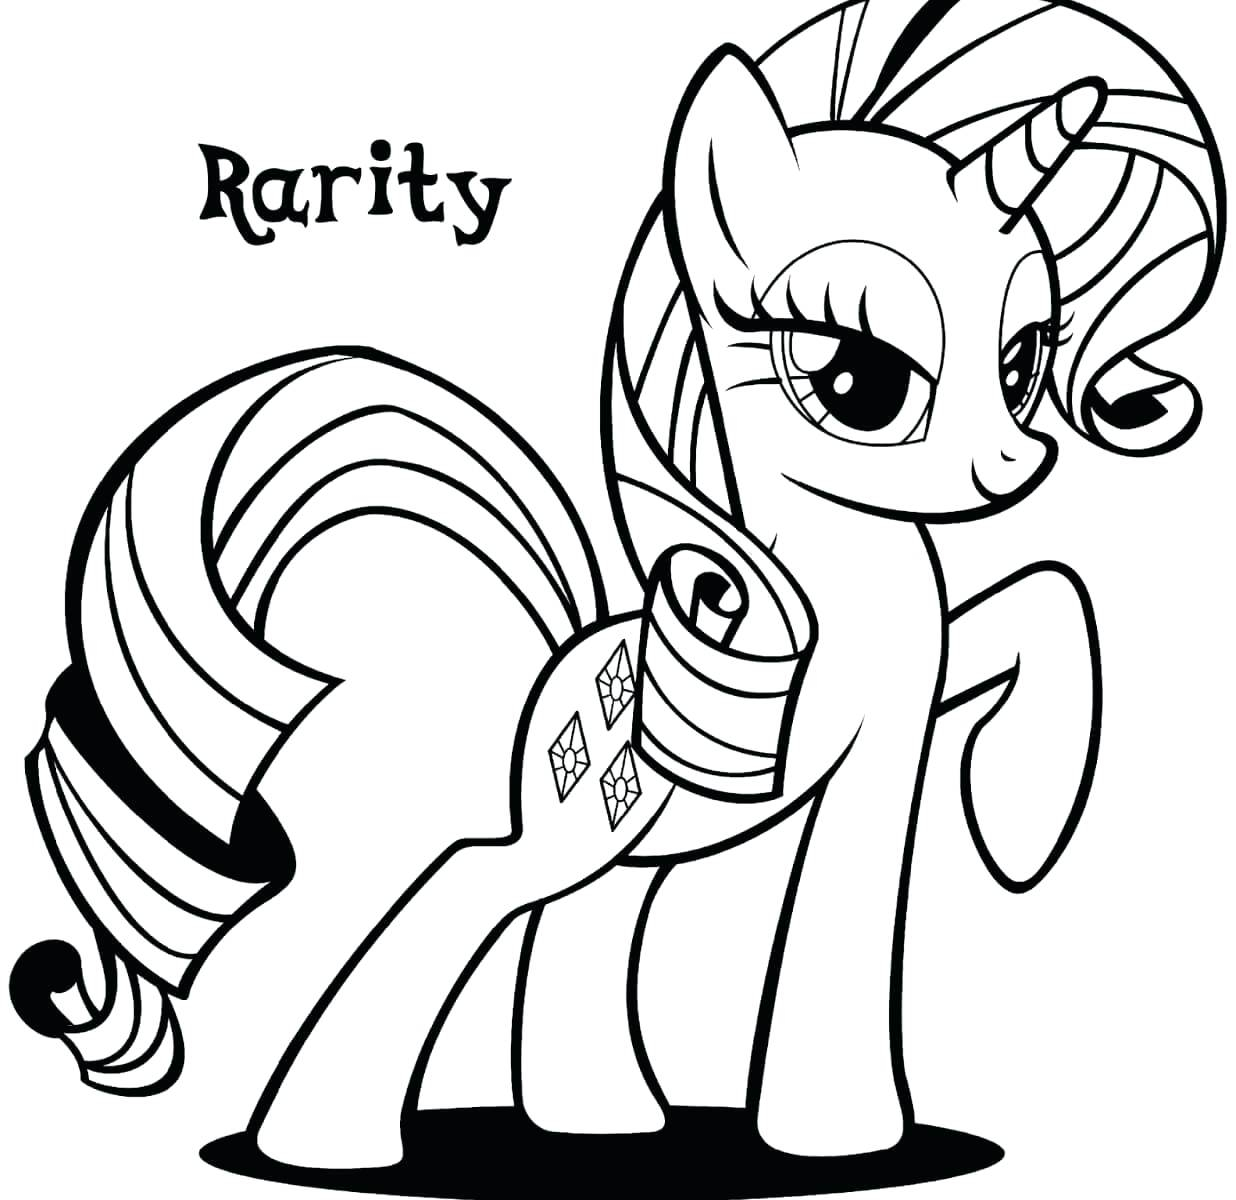 Mlp Coloring Pages Rarity My Little Pony Princess Printable Coloring Pages Cortexcolorco